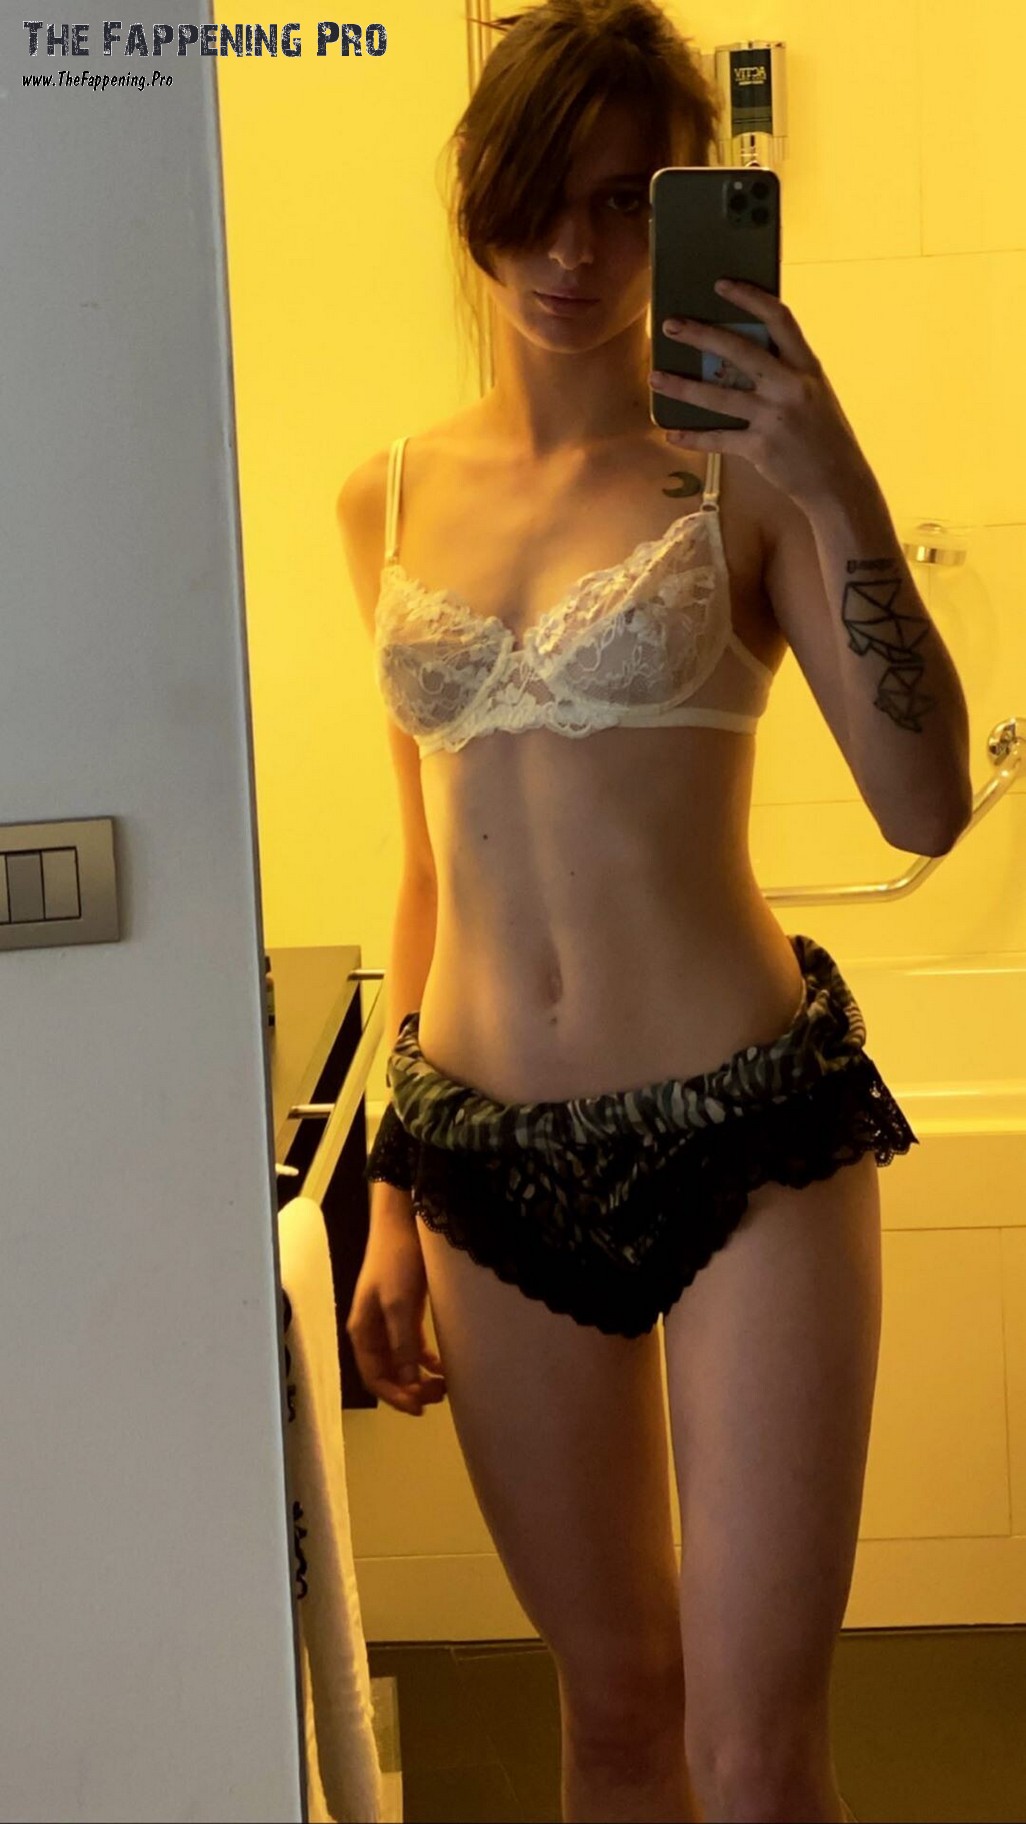 Alice Pagani Hot Selfie TheFappening.Pro 3 - Alice Pagani Nude Italian Actress (Over 200 Leaked Photos)